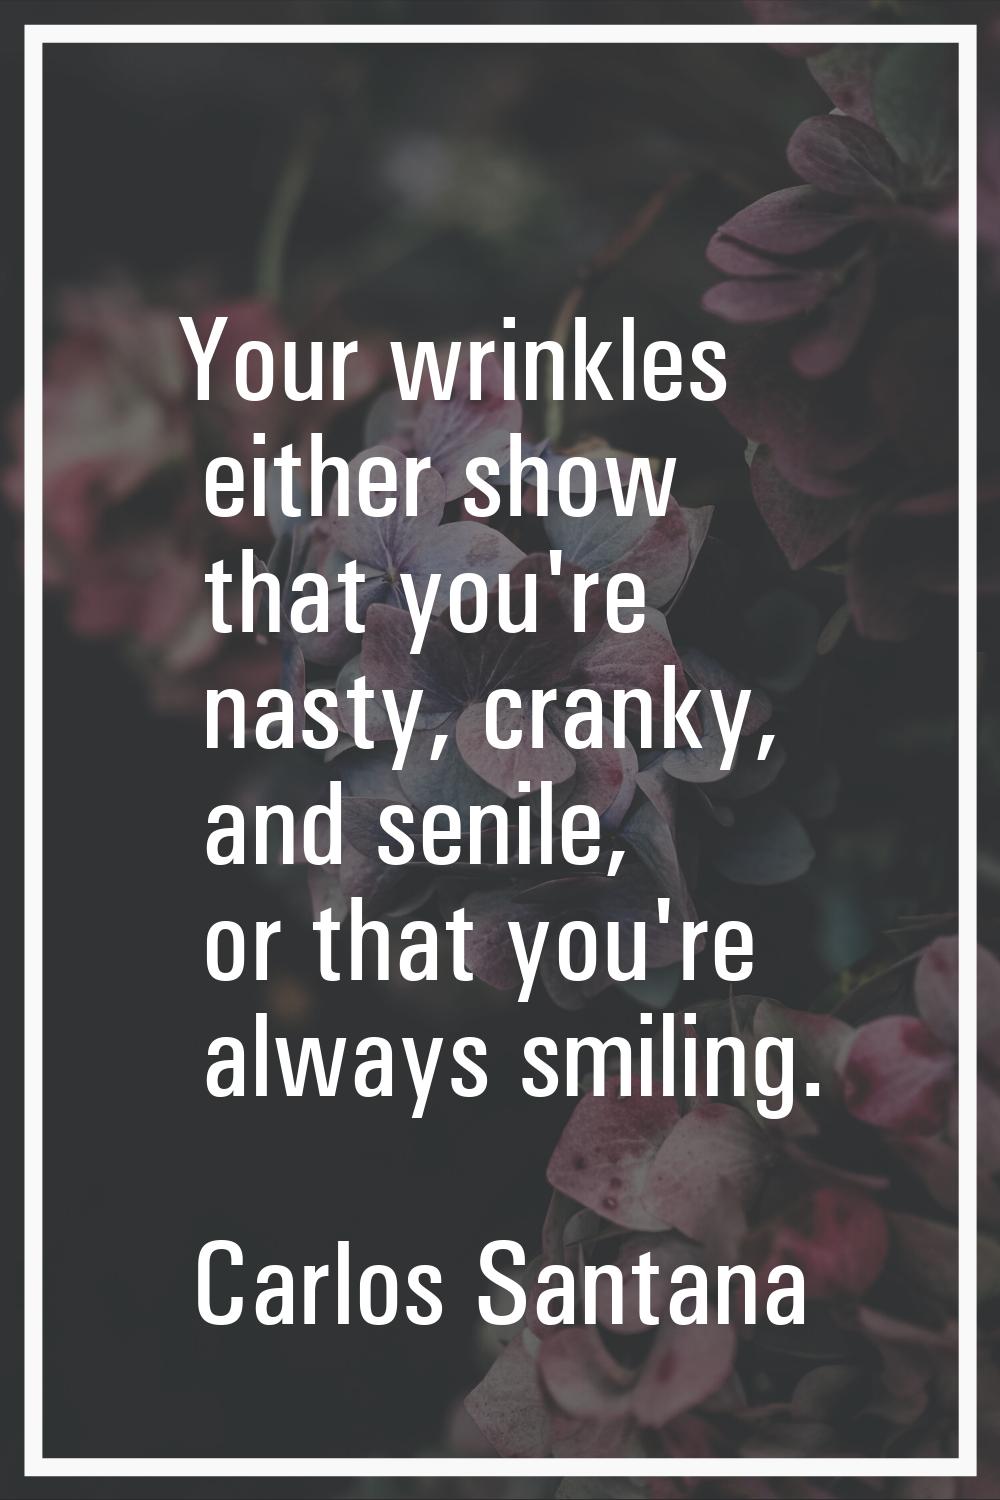 Your wrinkles either show that you're nasty, cranky, and senile, or that you're always smiling.